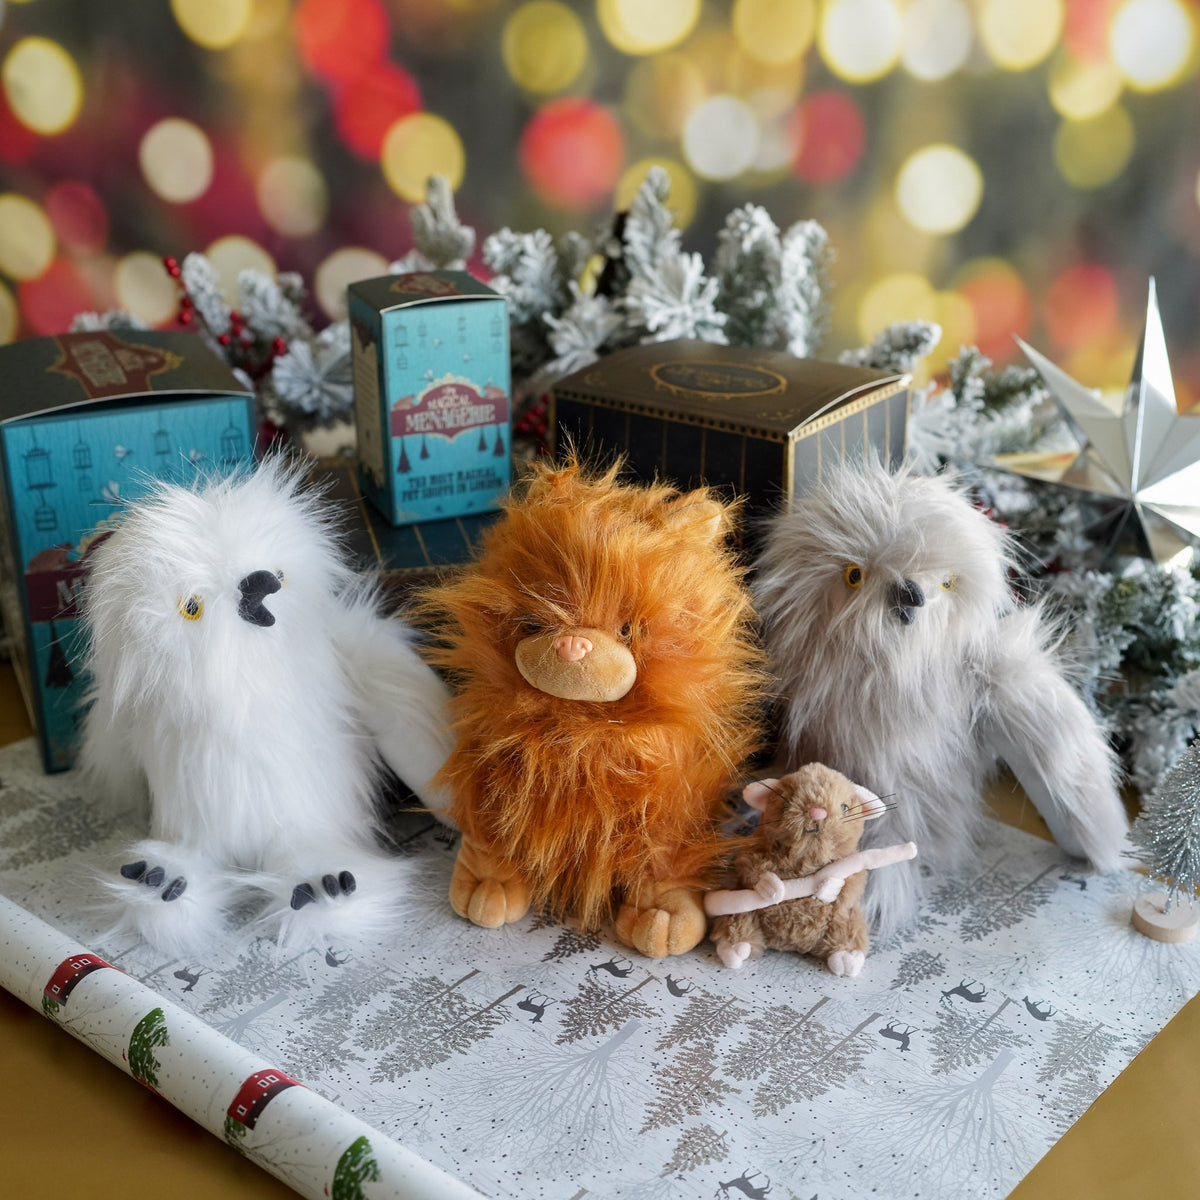 Adopt a Magical Gray Owl Plush with box cage and owl stuffed animal surrounded by white owl, cat, and rat